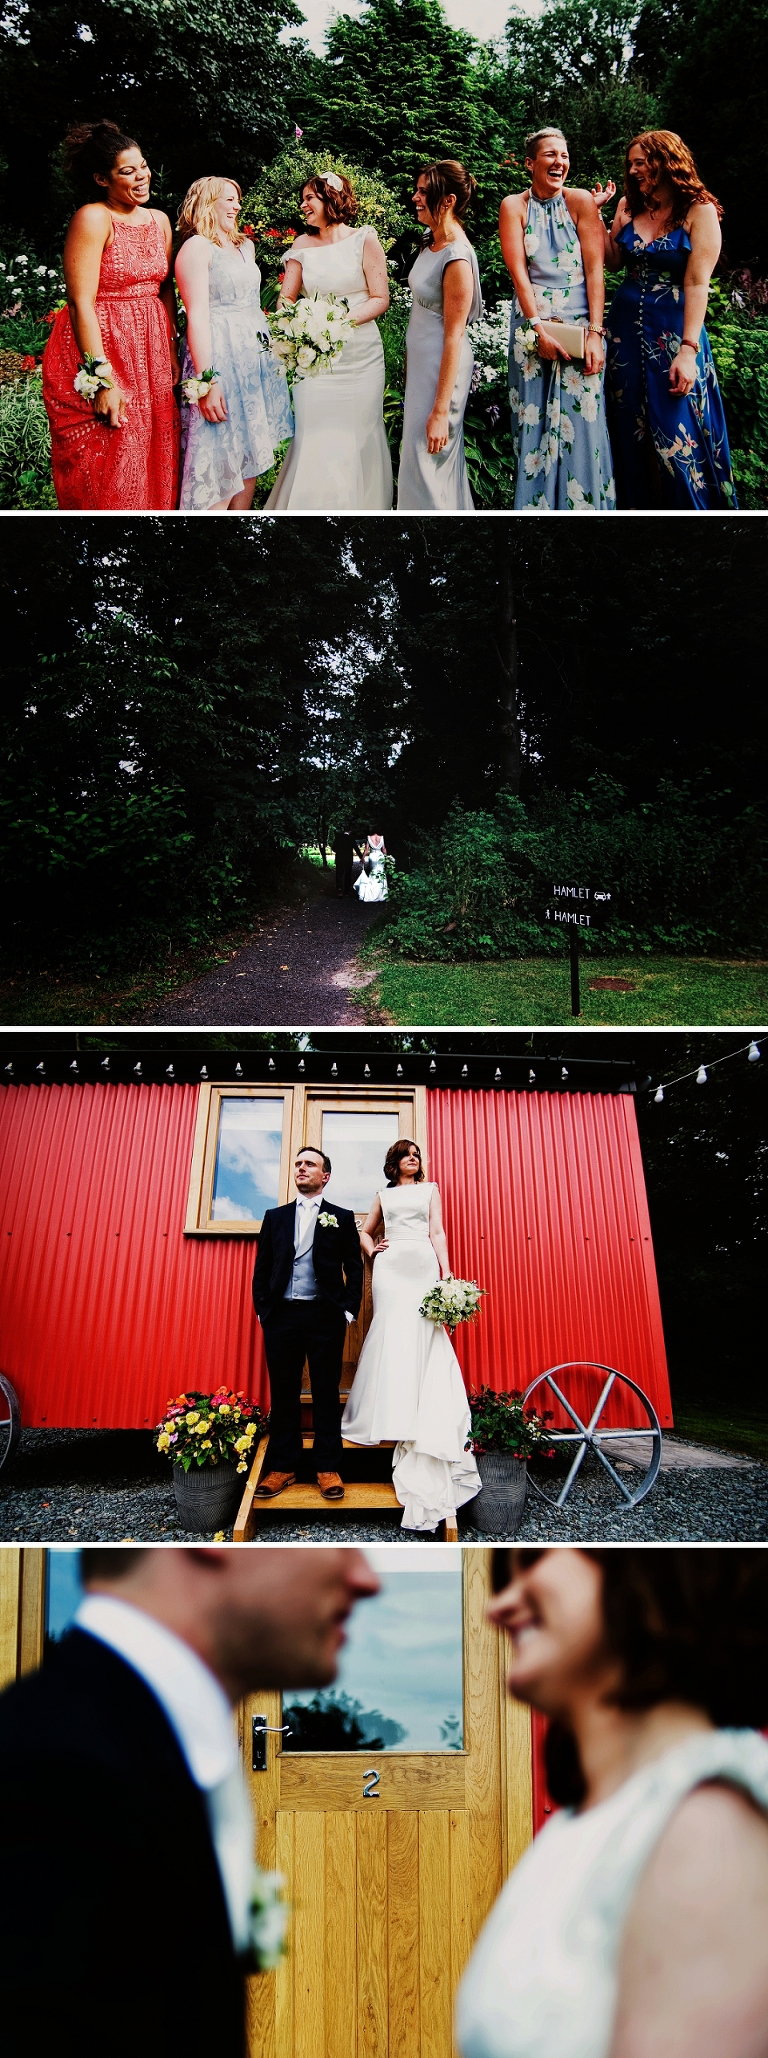 Bride and Groom at The Shepherds Hut at Samlesbury Hall in Lancashire